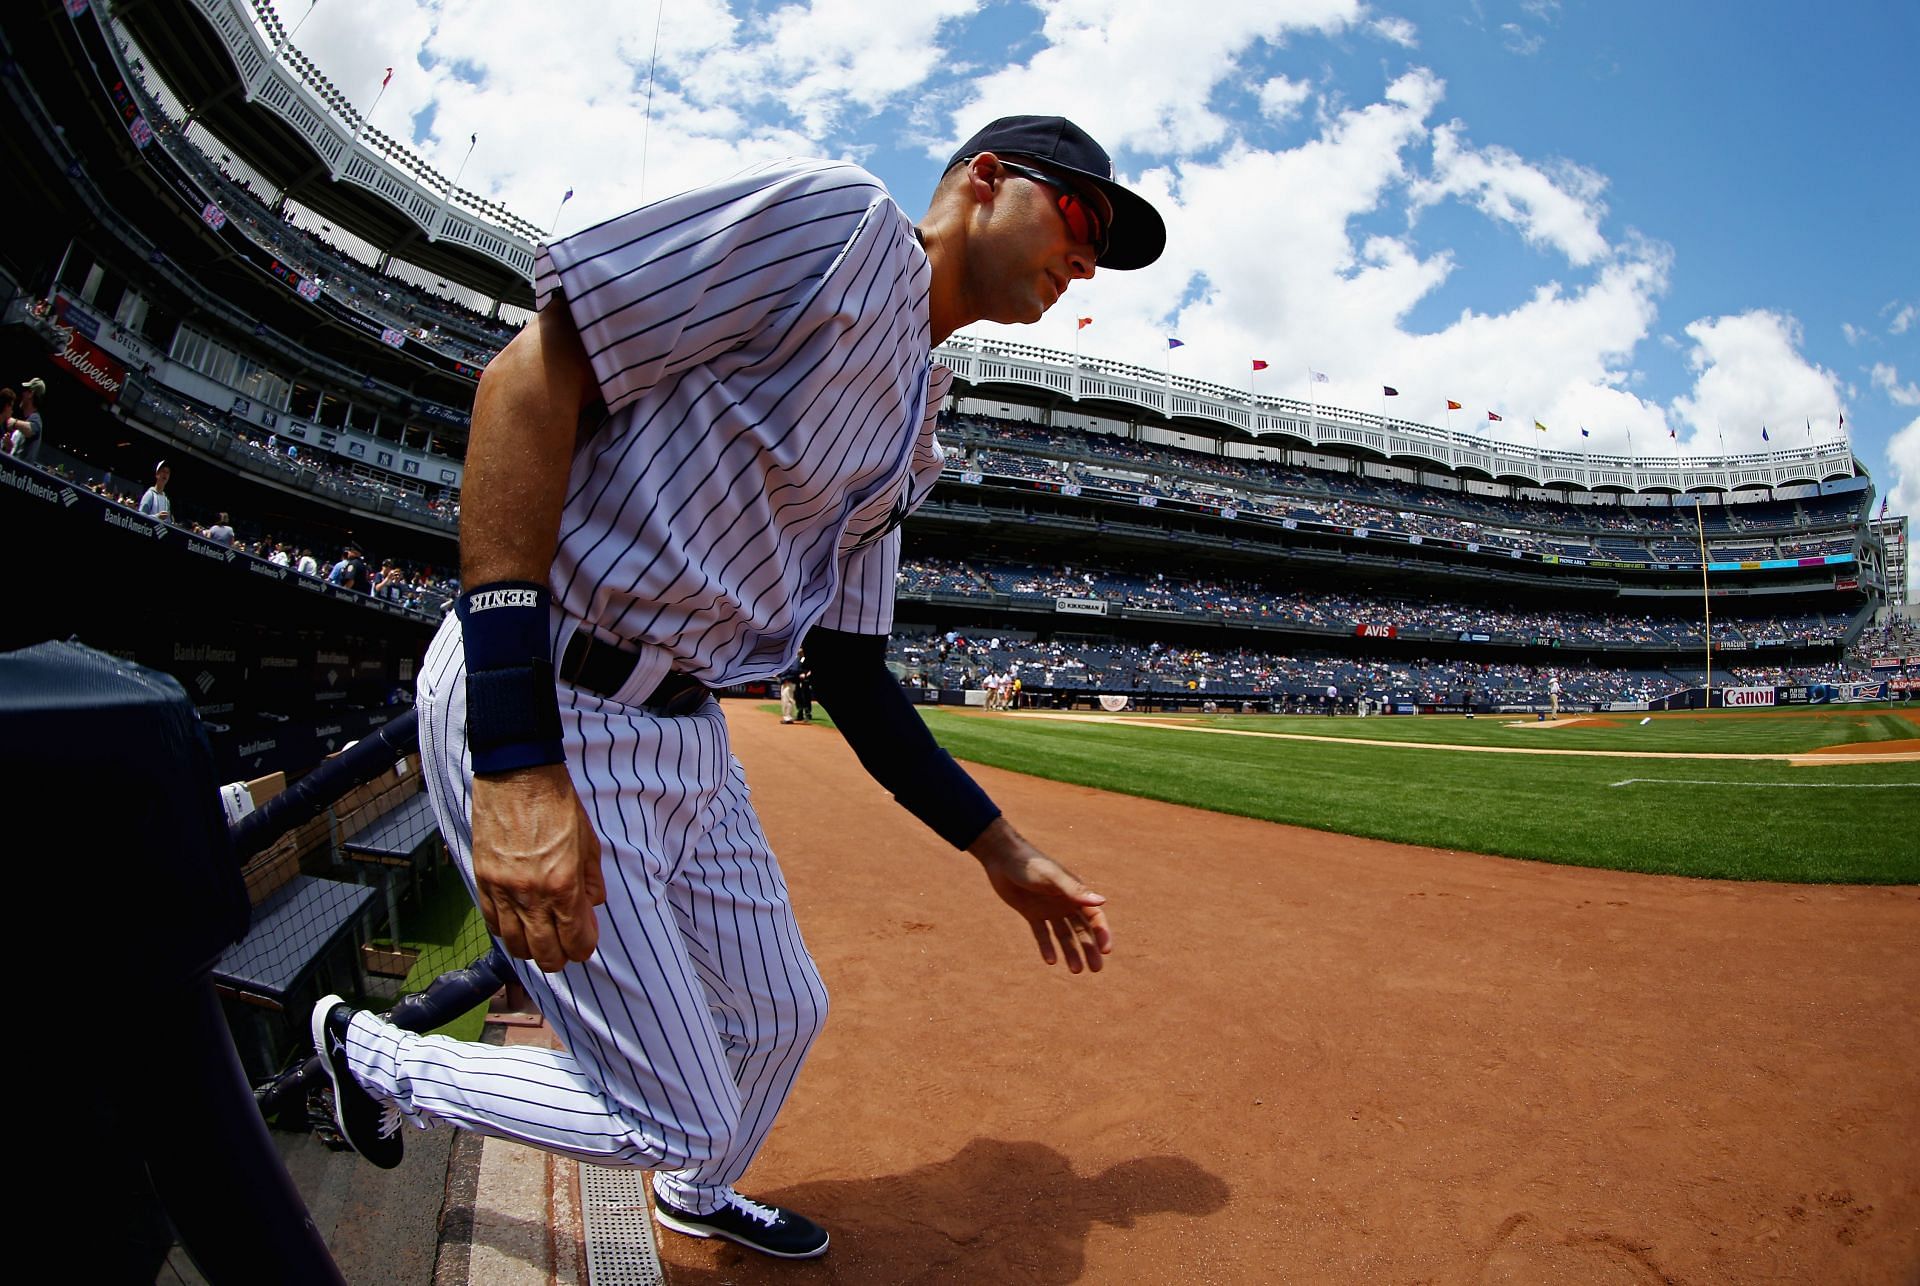 Jeter enters the field during a Pittsburgh Pirates v New York Yankees game.